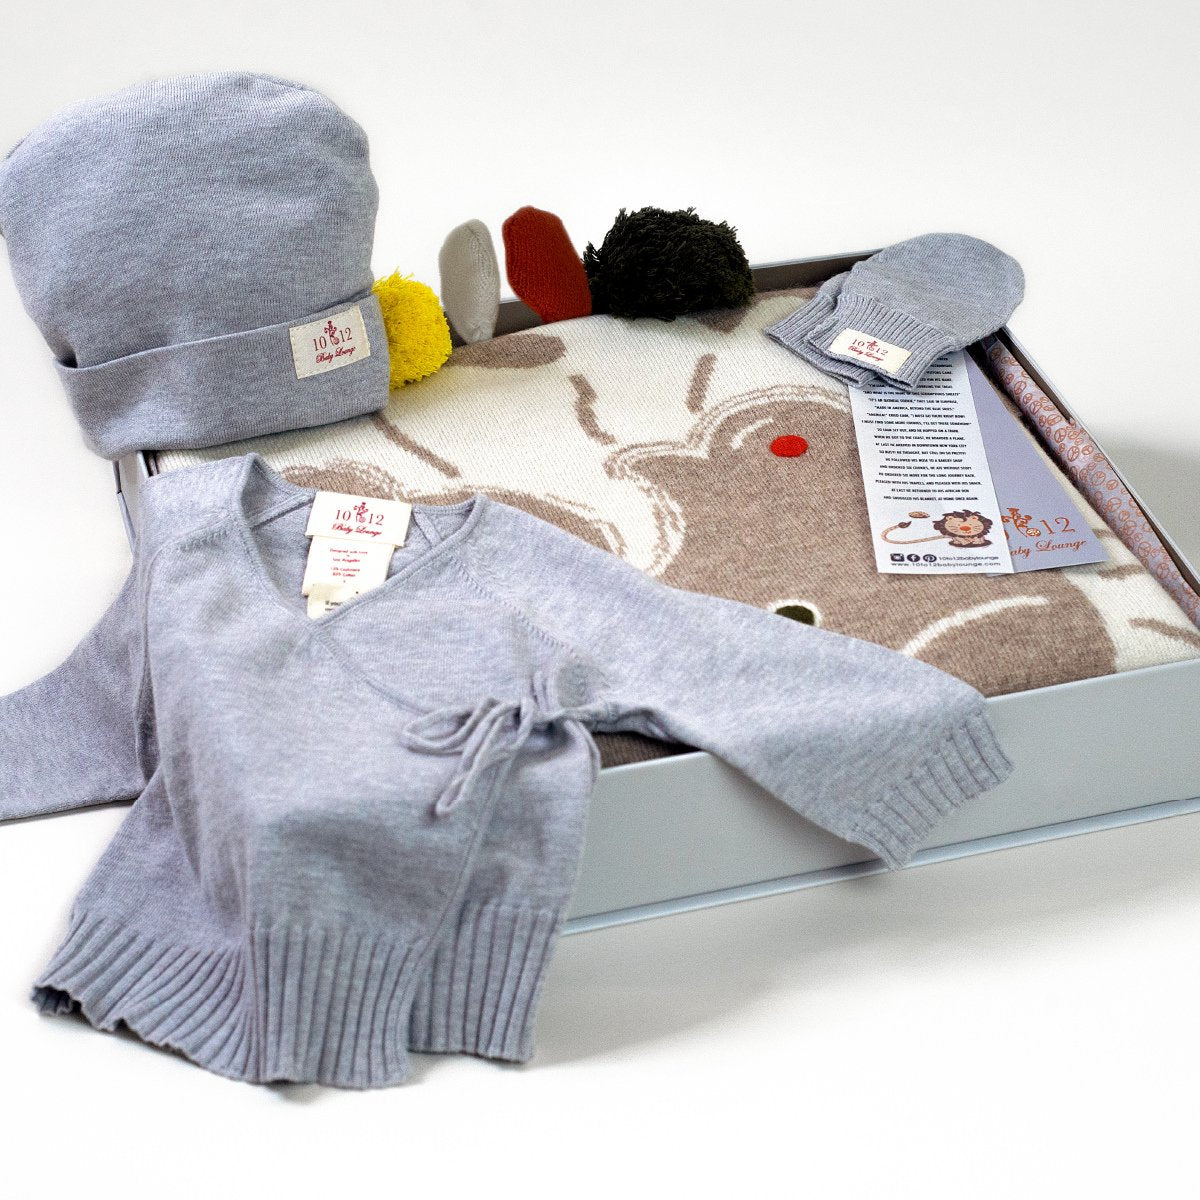 Corporate Baby Gifts